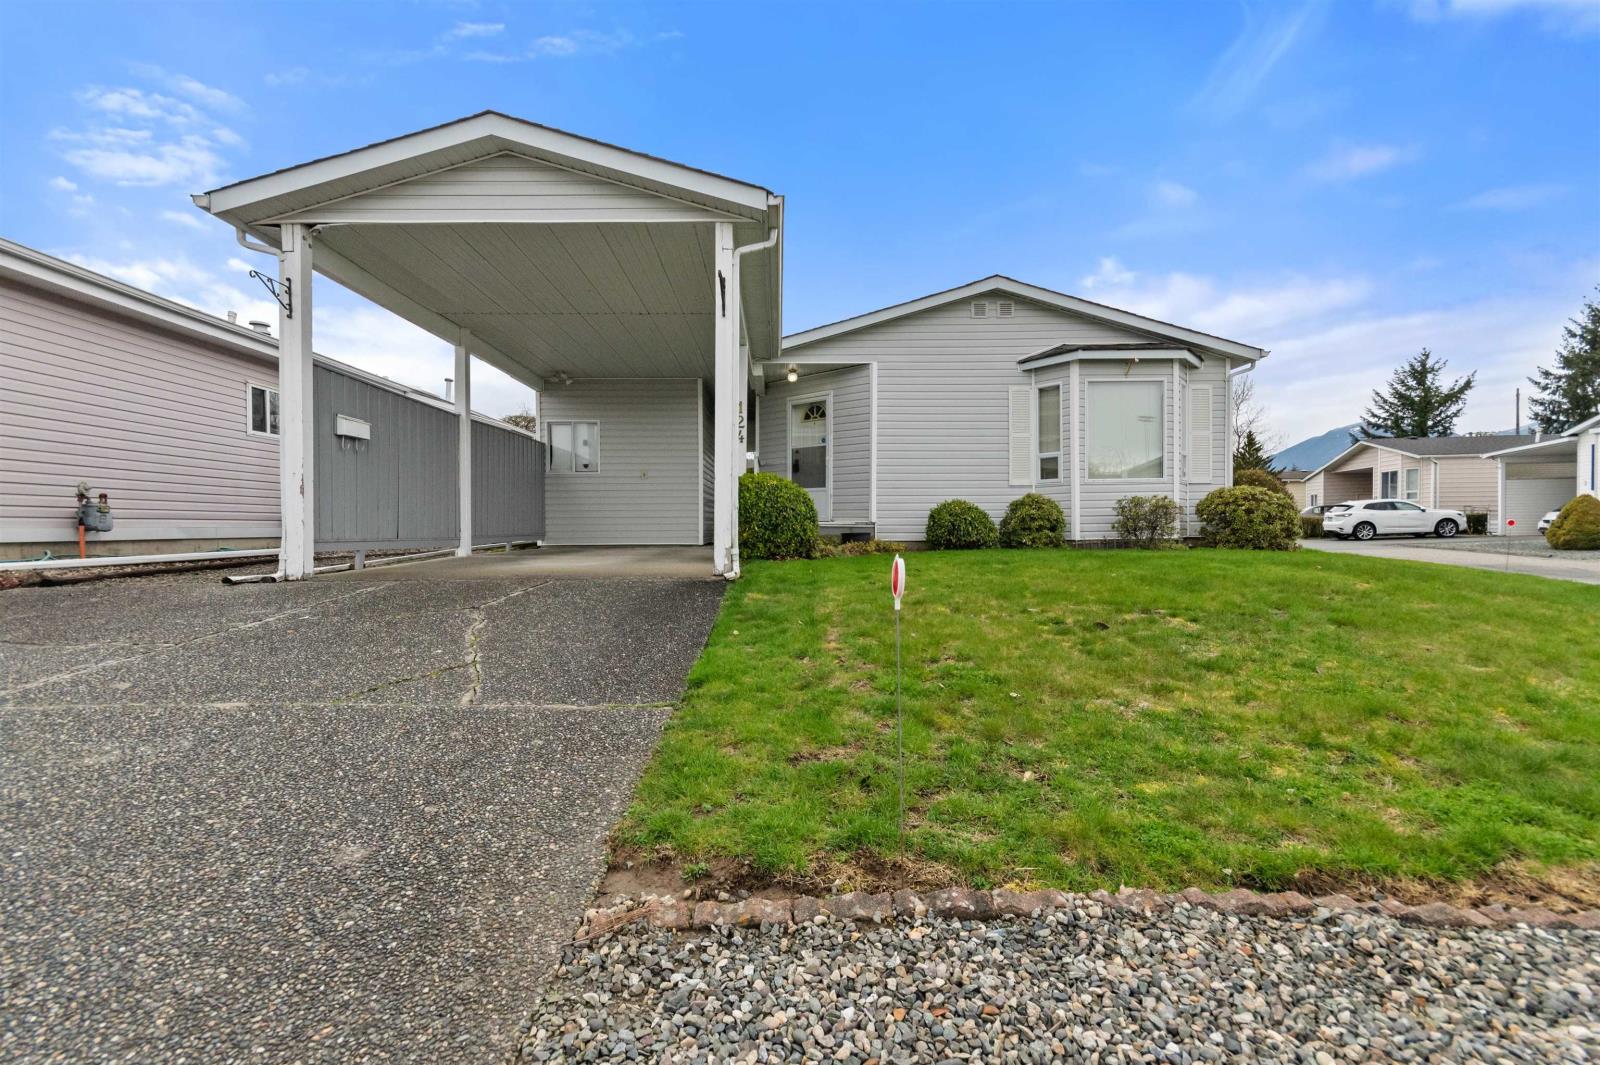 Chilliwack Manufactured Home for sale:  2 bedroom 1,128 sq.ft. (Listed 2106-02-06)